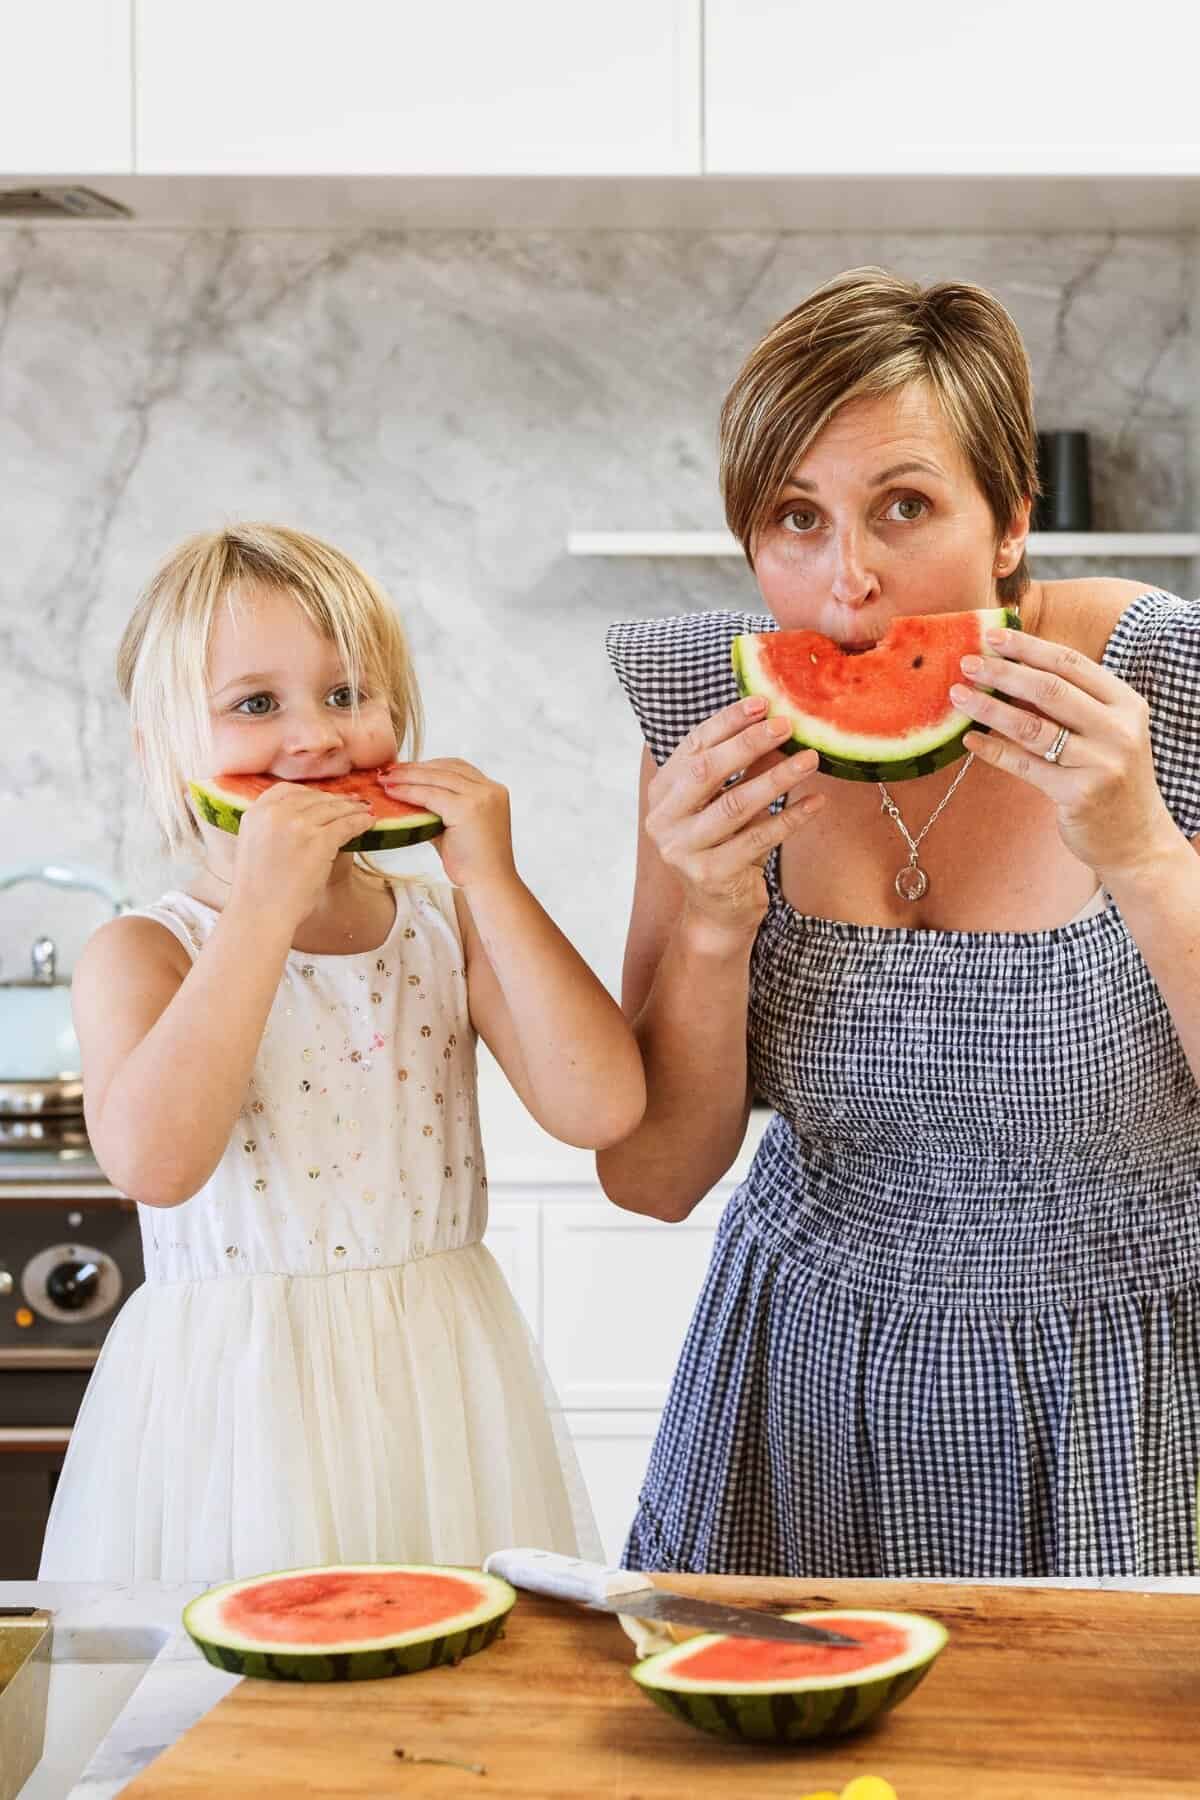 A mother and a toddler both biting into large slices of watermelon.